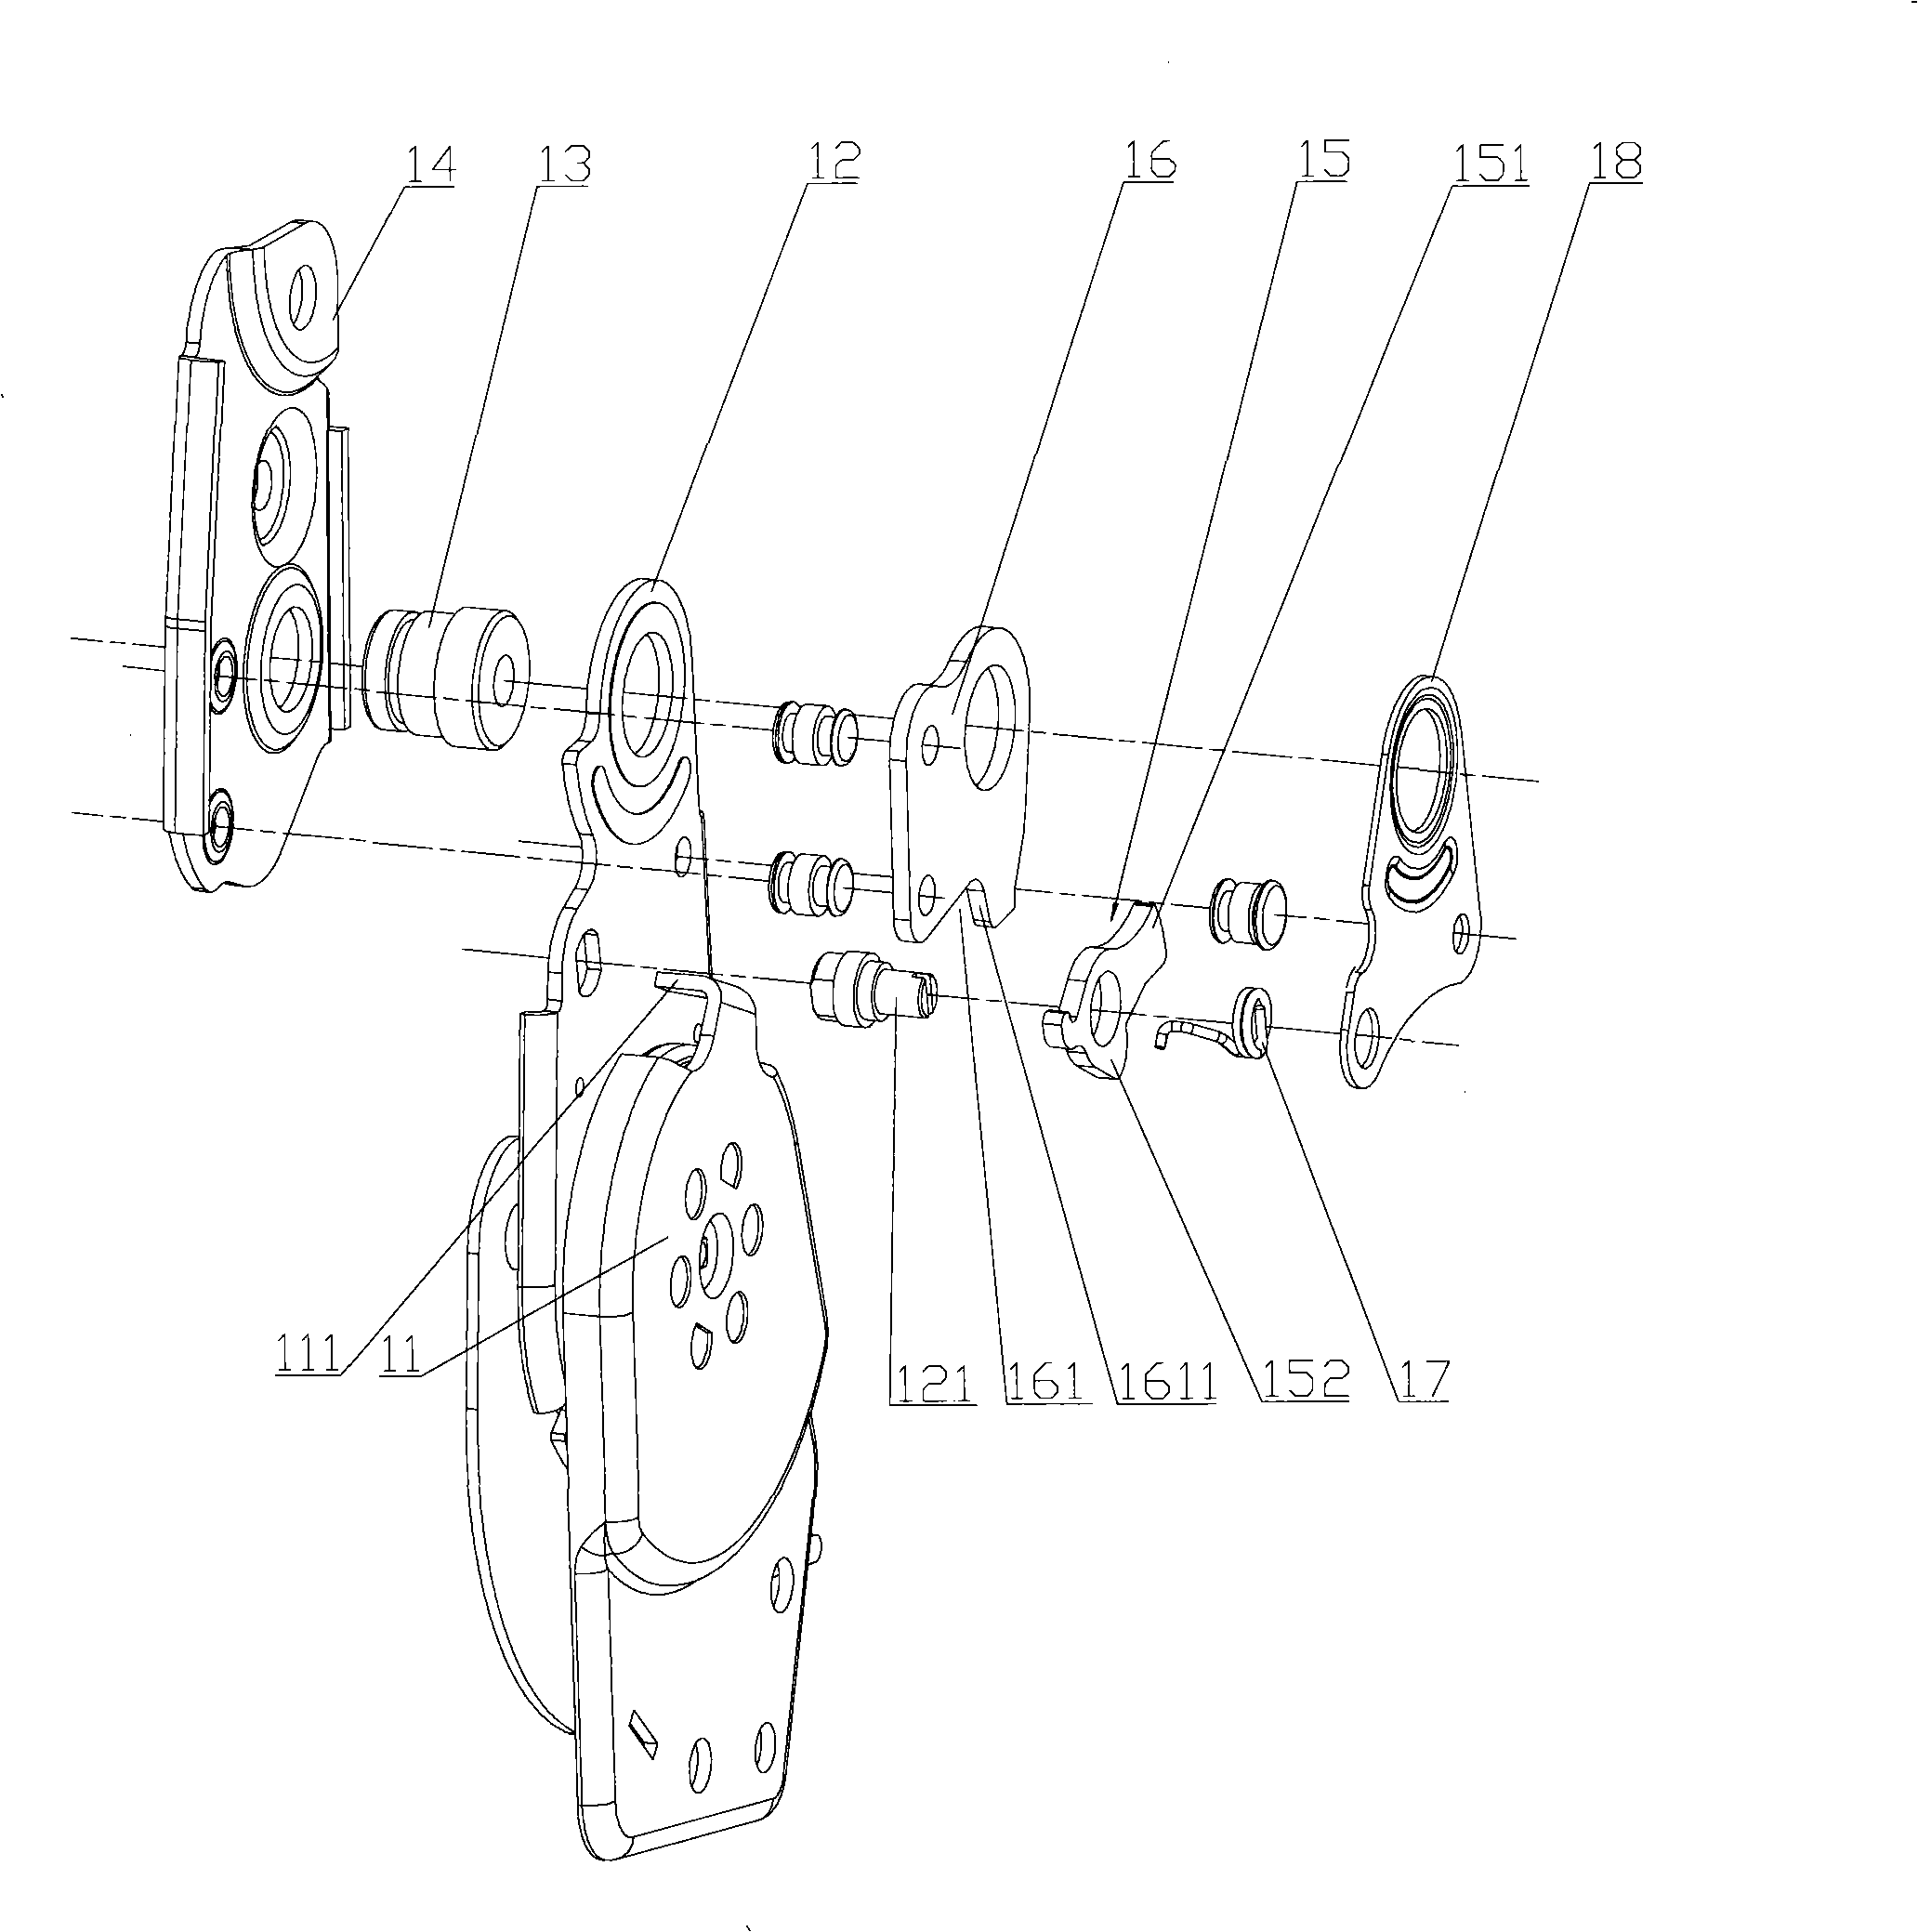 Folding and self-locking apparatus of chair backrest